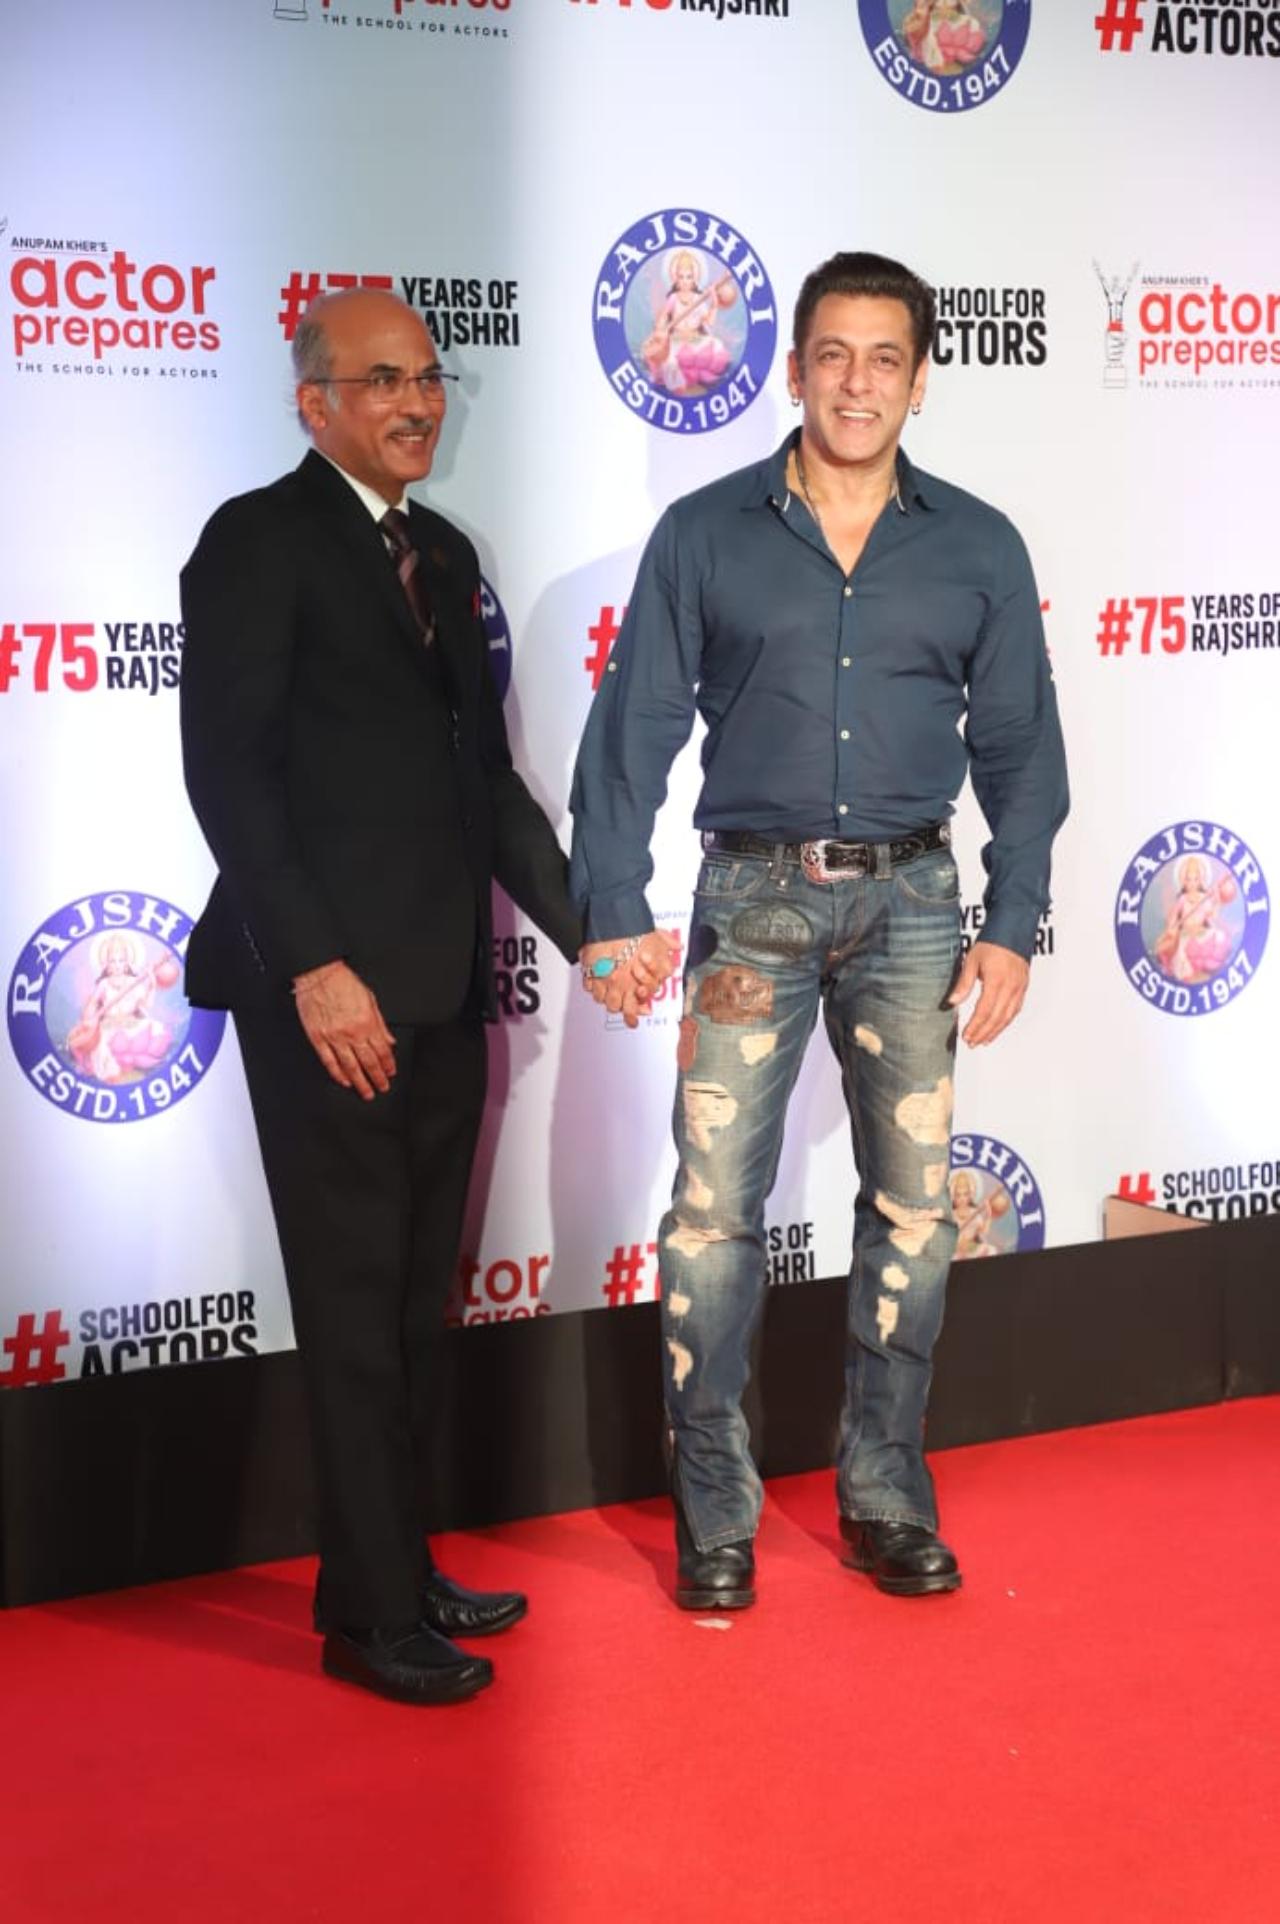 Salman Khan was in his best mood as he posed with director Sooraj Barjatya who made his character Prem popular. Salman held Sooraj's hand and give him a hug as soon as he arrived. The two have worked together in films like Maine Pyar Kiya, Hum Saath Saath hain, Hum Aapke Hai Koun, and Prem Ratan Dhan Paayo. The duo will be soon collaborating together on a film